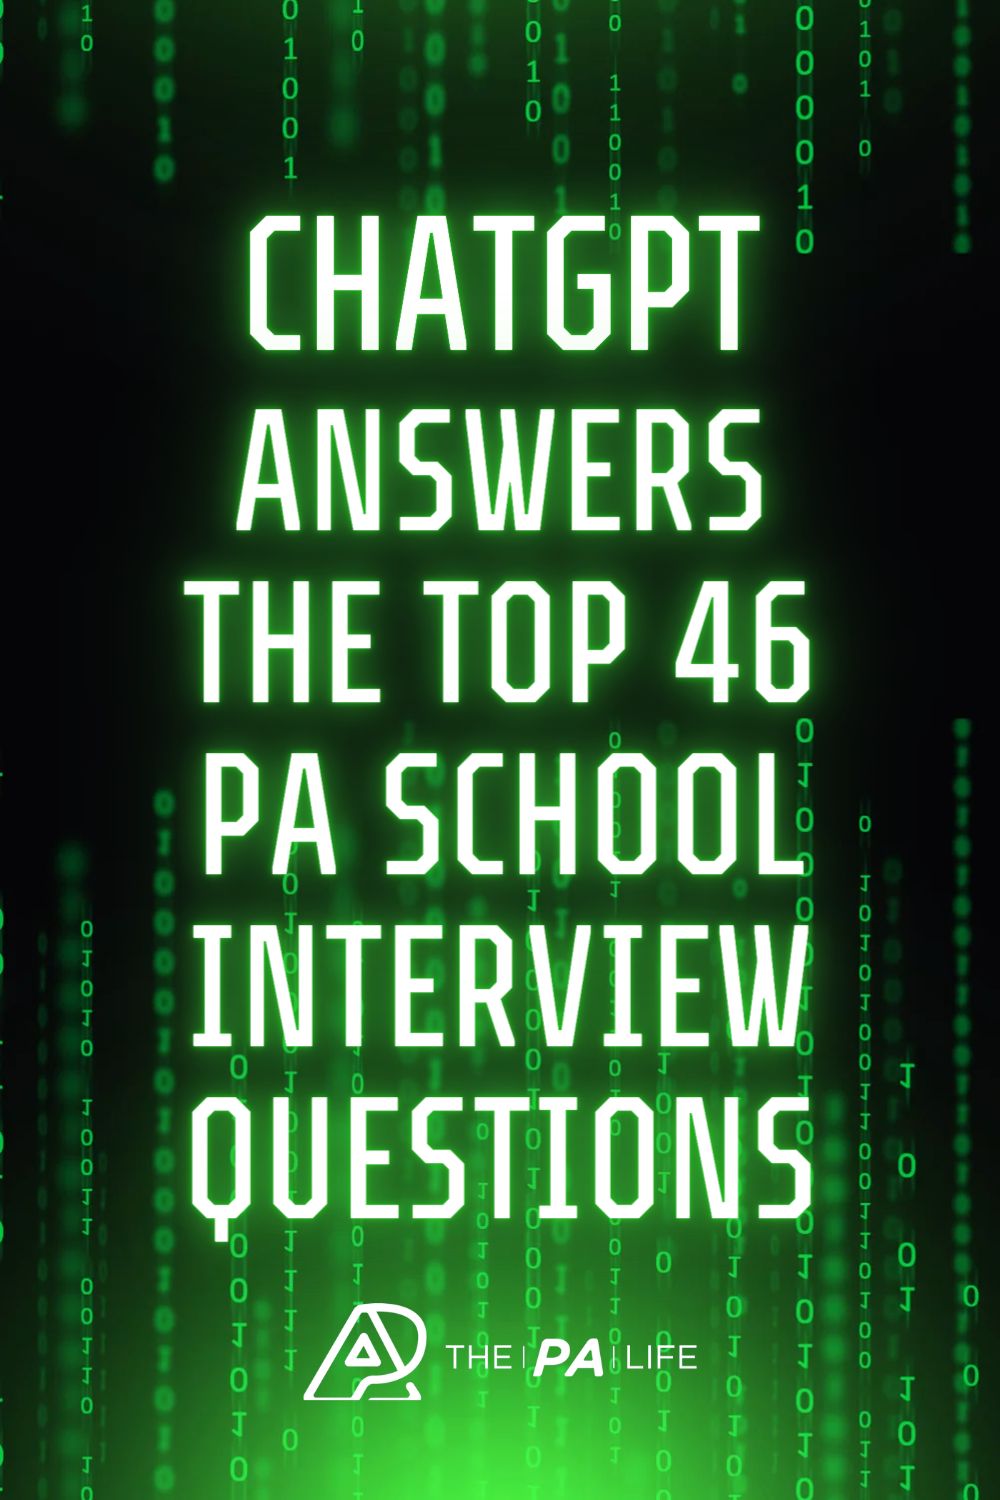 ChatGPT Answers the Top 46 PA School Applicant Interview Questions